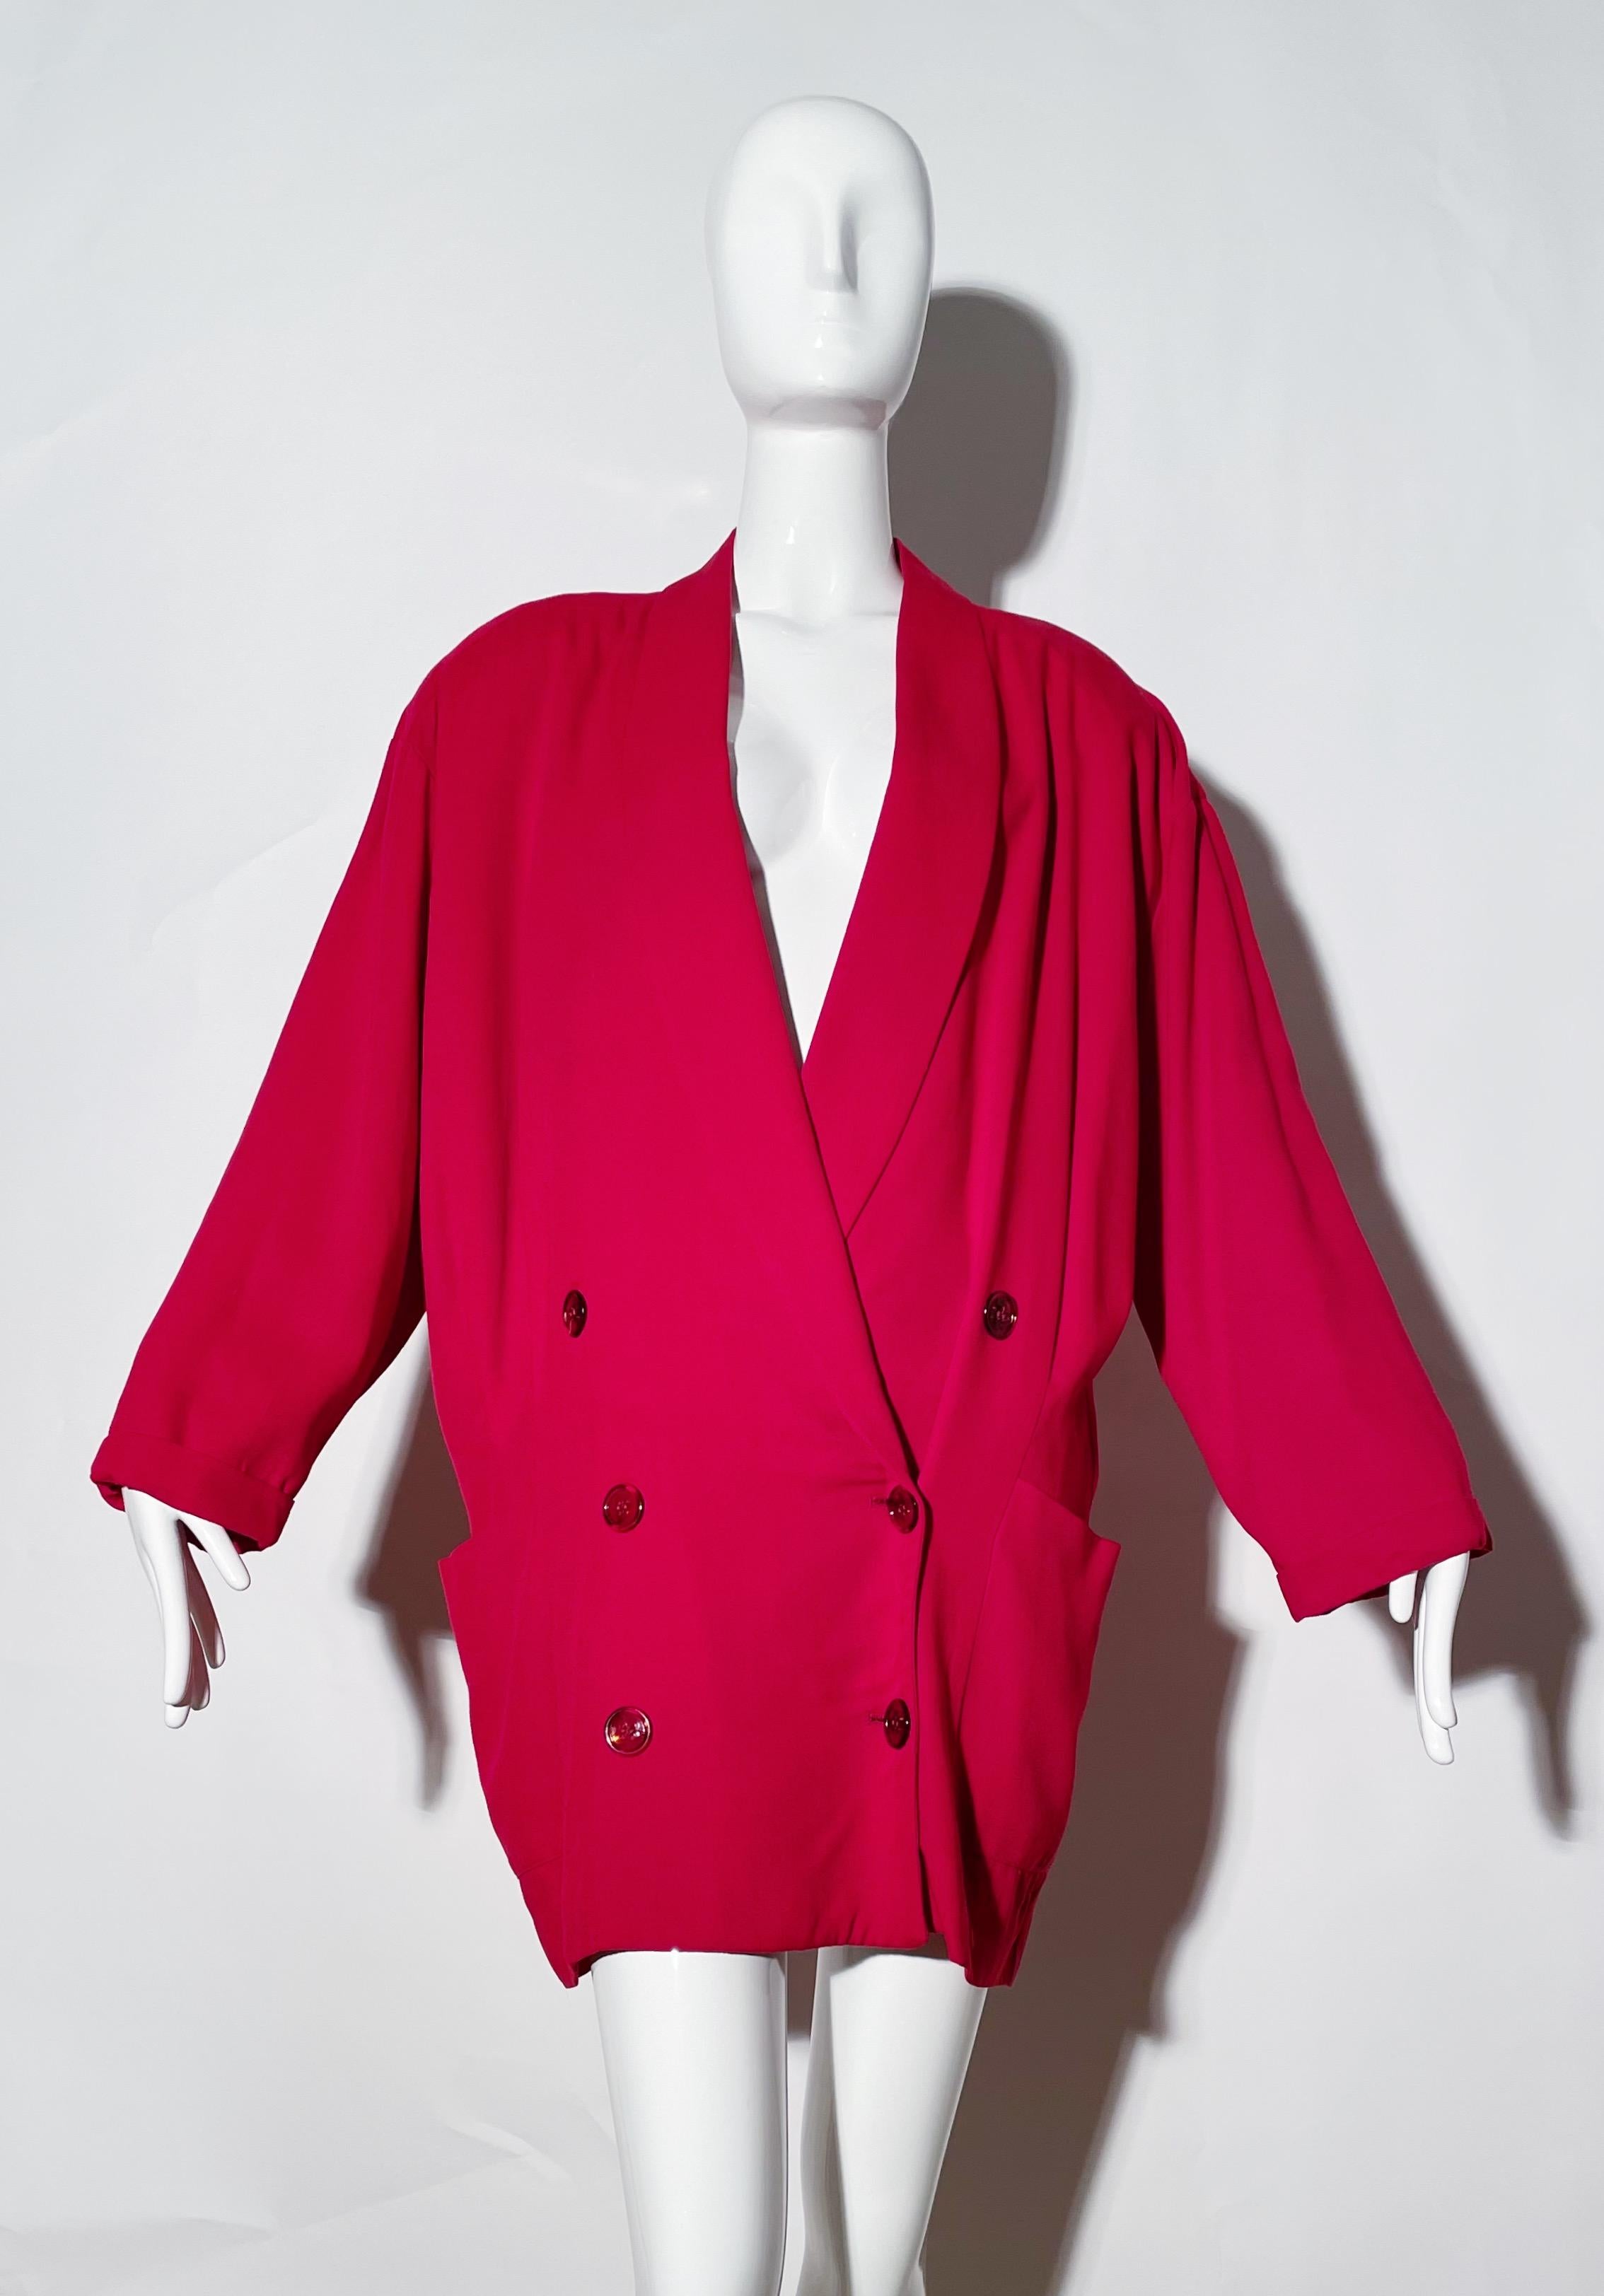 Red blazer dress. Padded shoulders. Double breasted. Collared. Front pockets. Lined. Wool blend. 
*Condition: Excellent vintage condition. No visible Flaws.

Measurements Taken Laying Flat (inches)—
Shoulder to Shoulder: 23 in.
Sleeve Length: 20